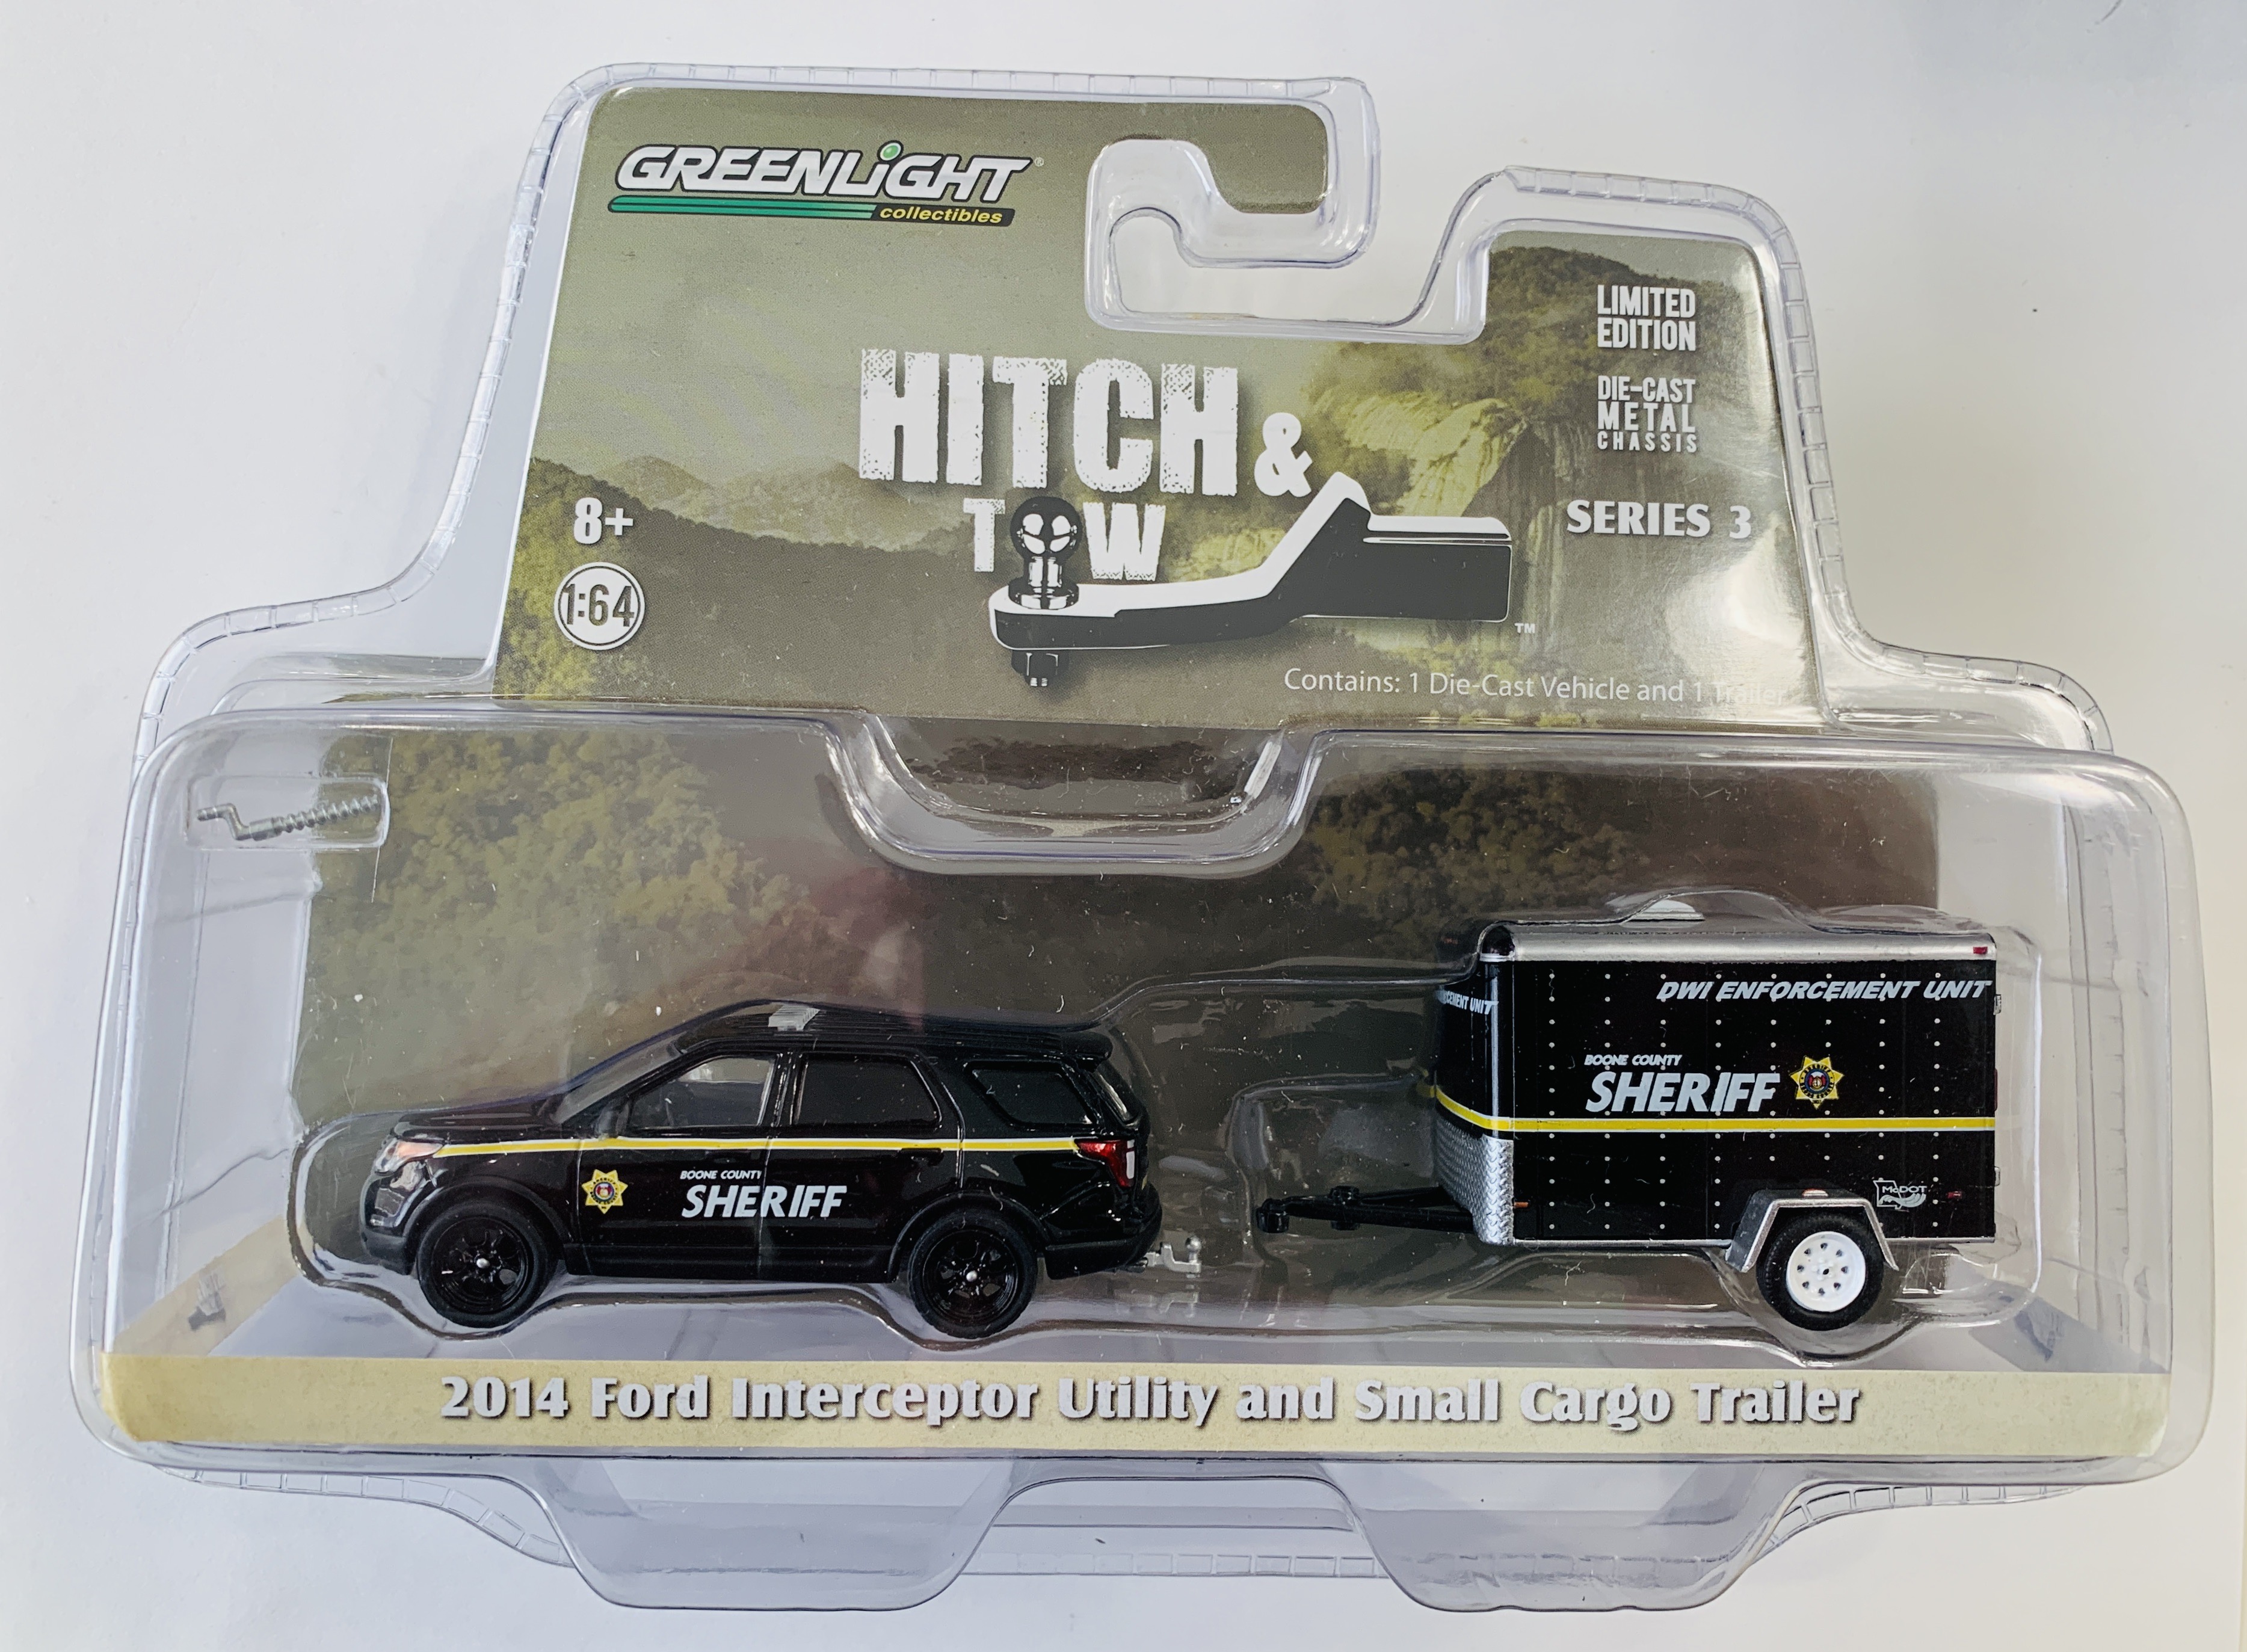 Greenlight Hitch & Tow 2014 Ford Interceptor Utility and Small Cargo Trailer